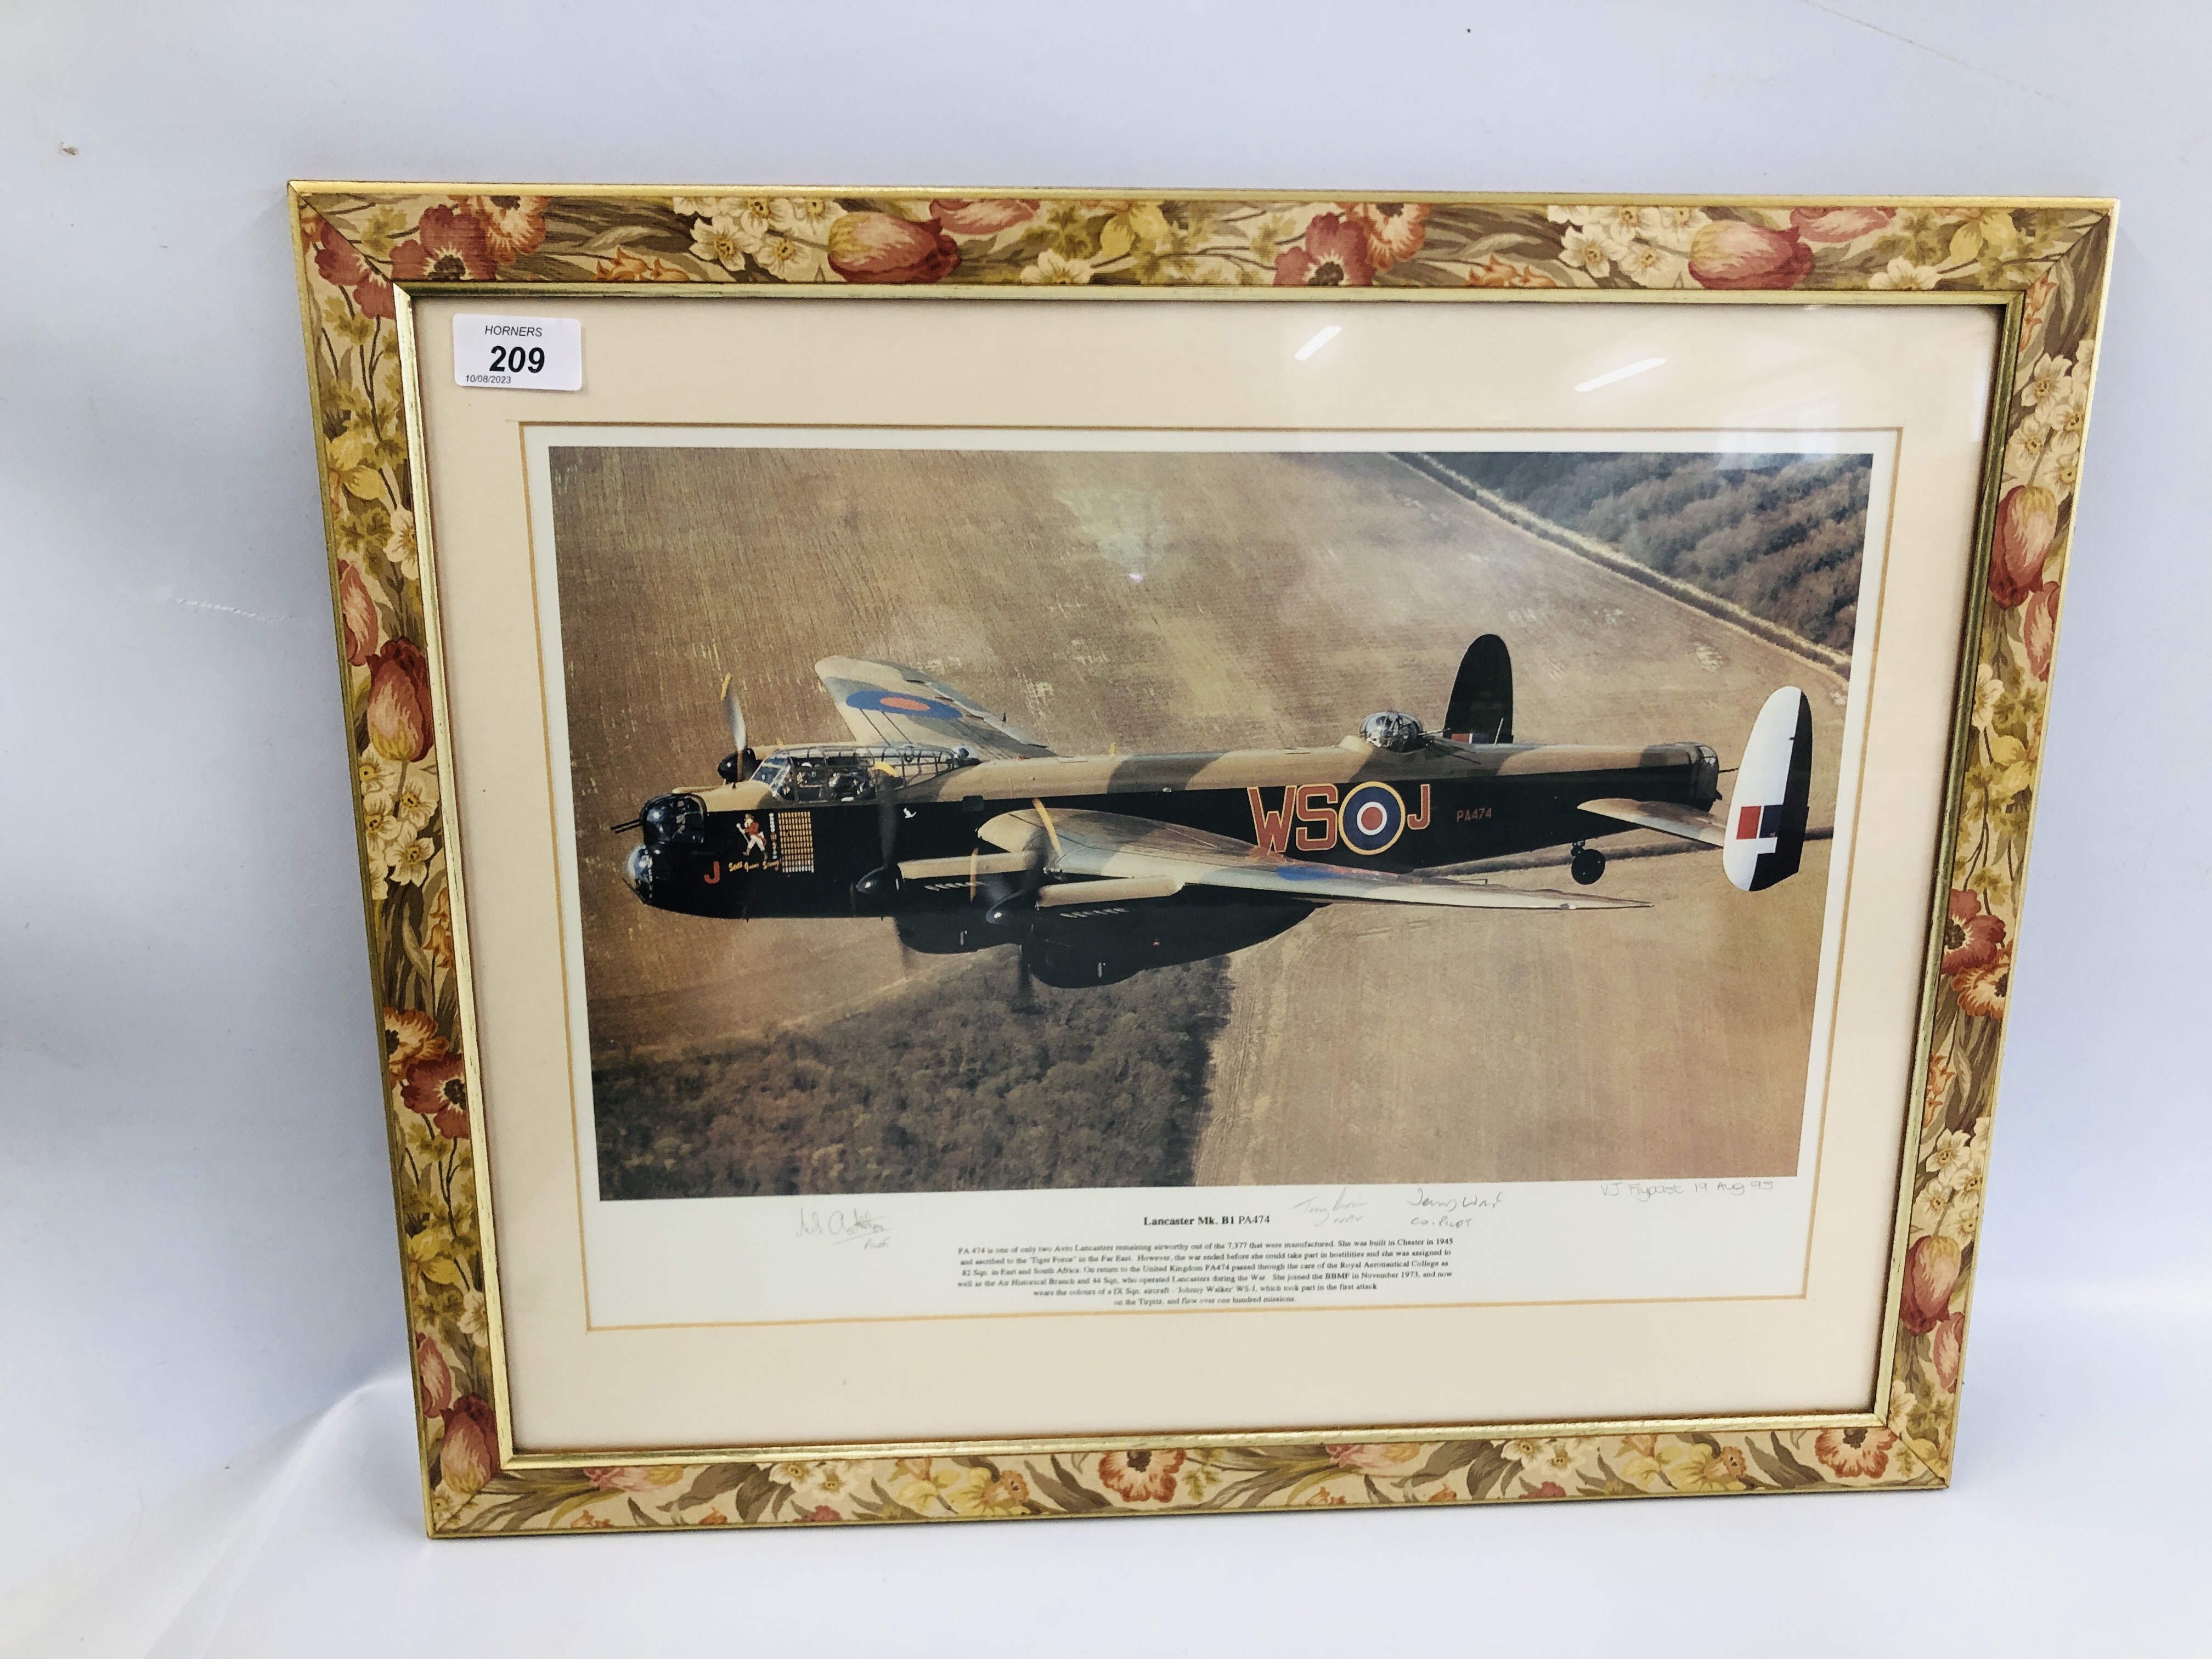 A MOUNTED PRINT OF THE LANCASTER MK B1 Pa474 VJ FLYPAST 19TH.